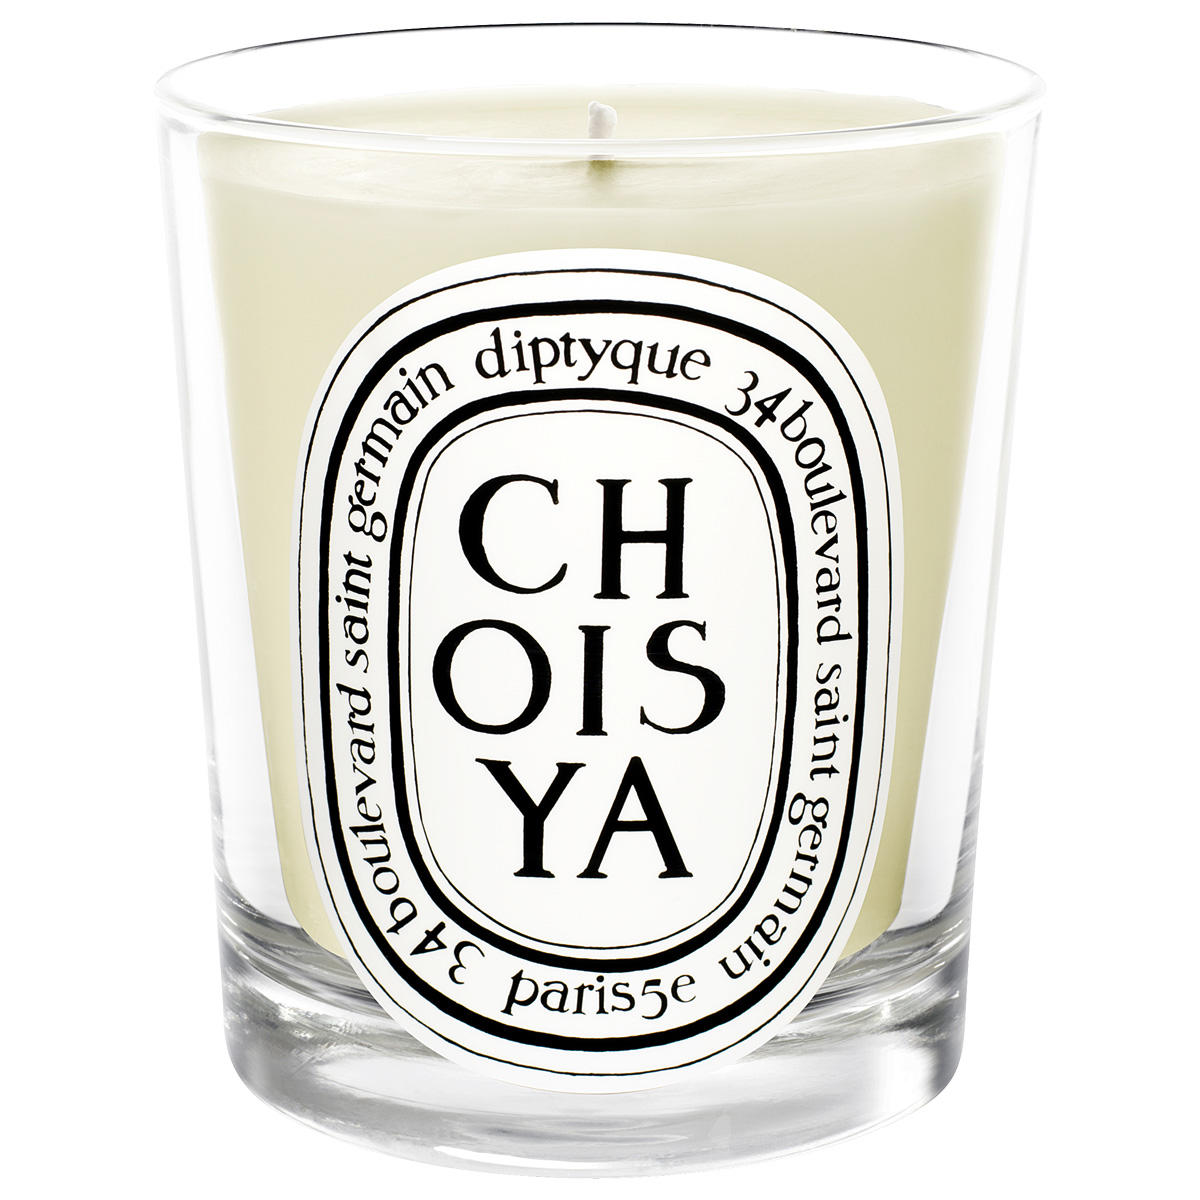 diptyque Choisya scented candle 190 g - 1